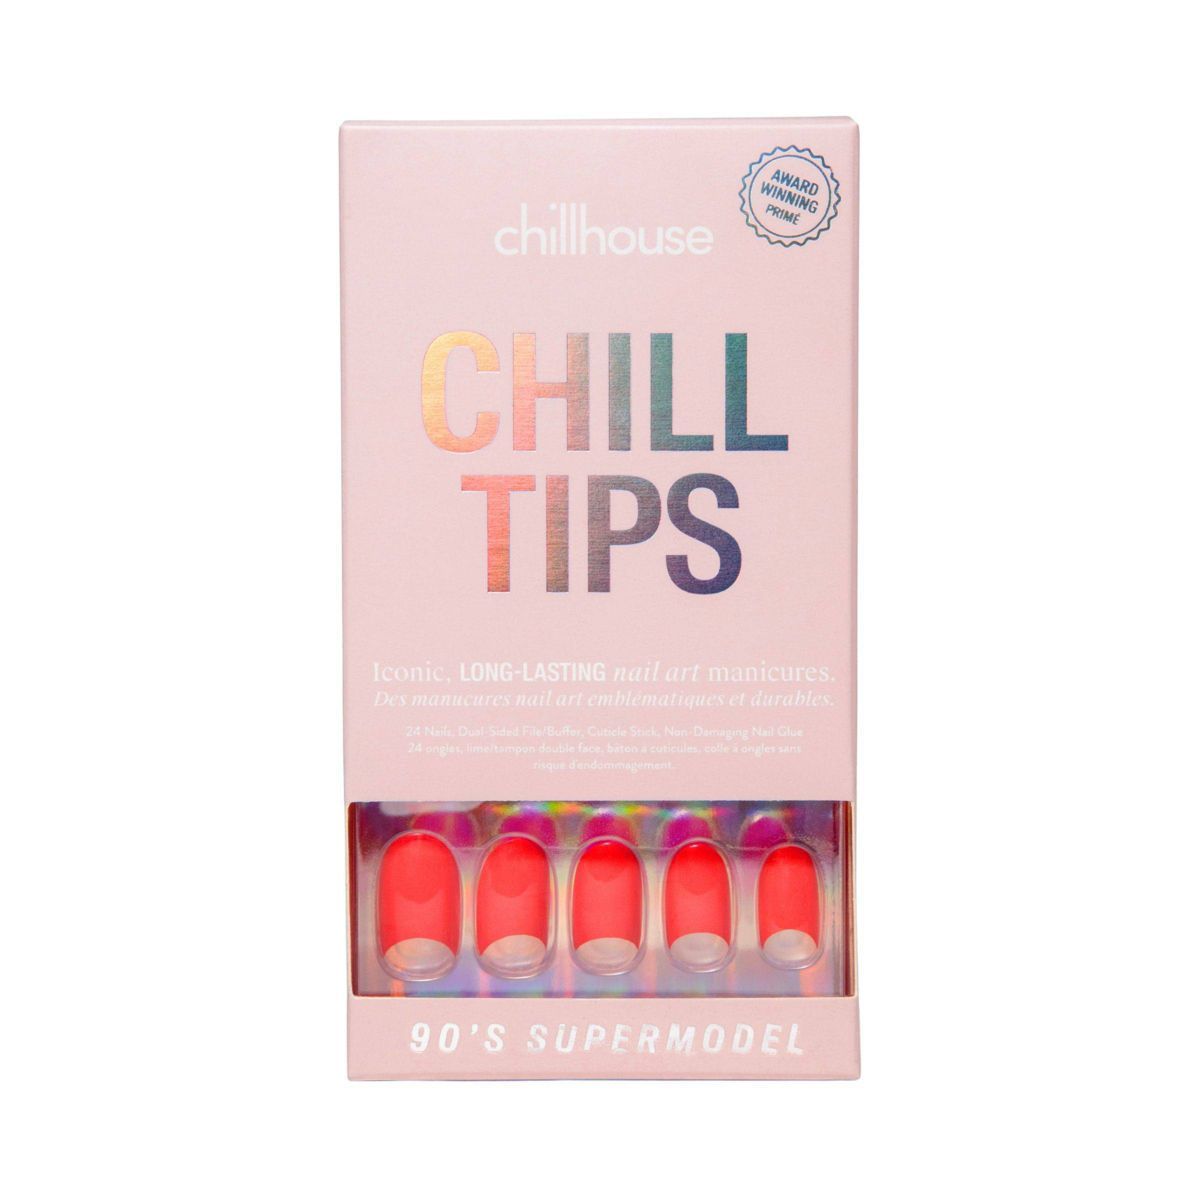 Chillhouse Chill Tips Nail Art Press On Fake Nails - 90's Supermodel - 24ct | Target